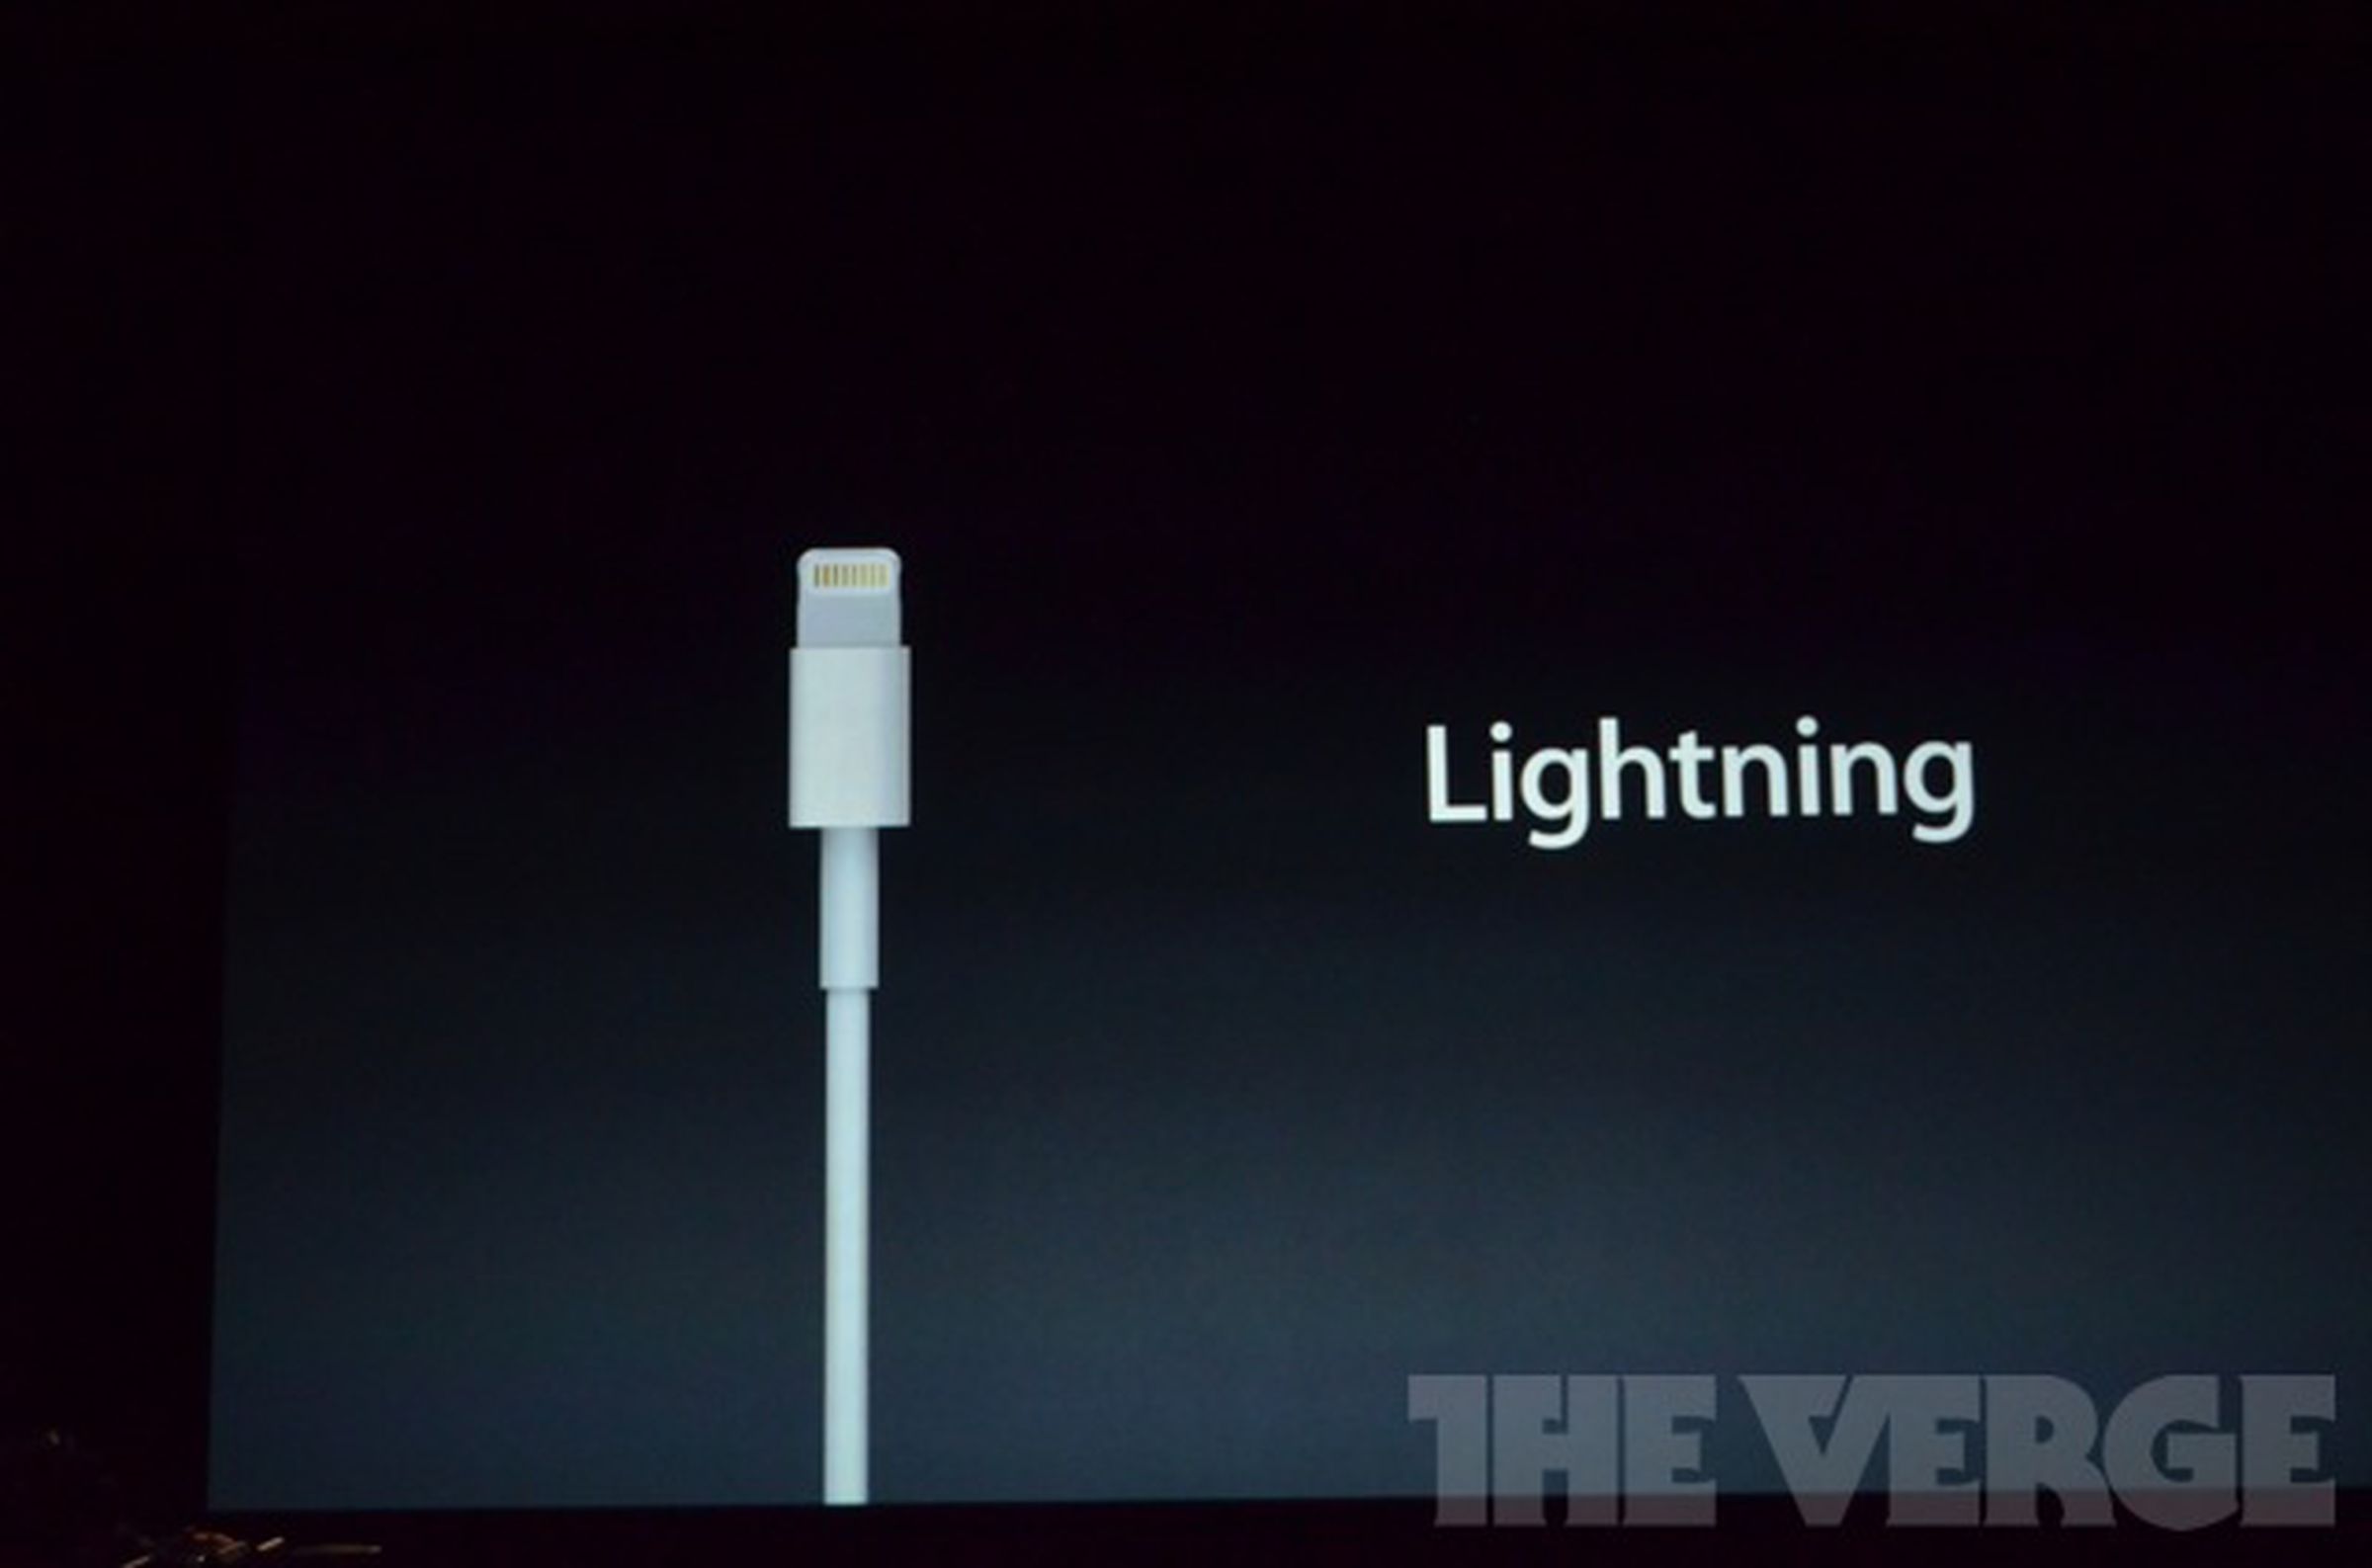 Liveblog images of Lightning, Apple's new iPhone 5 connector